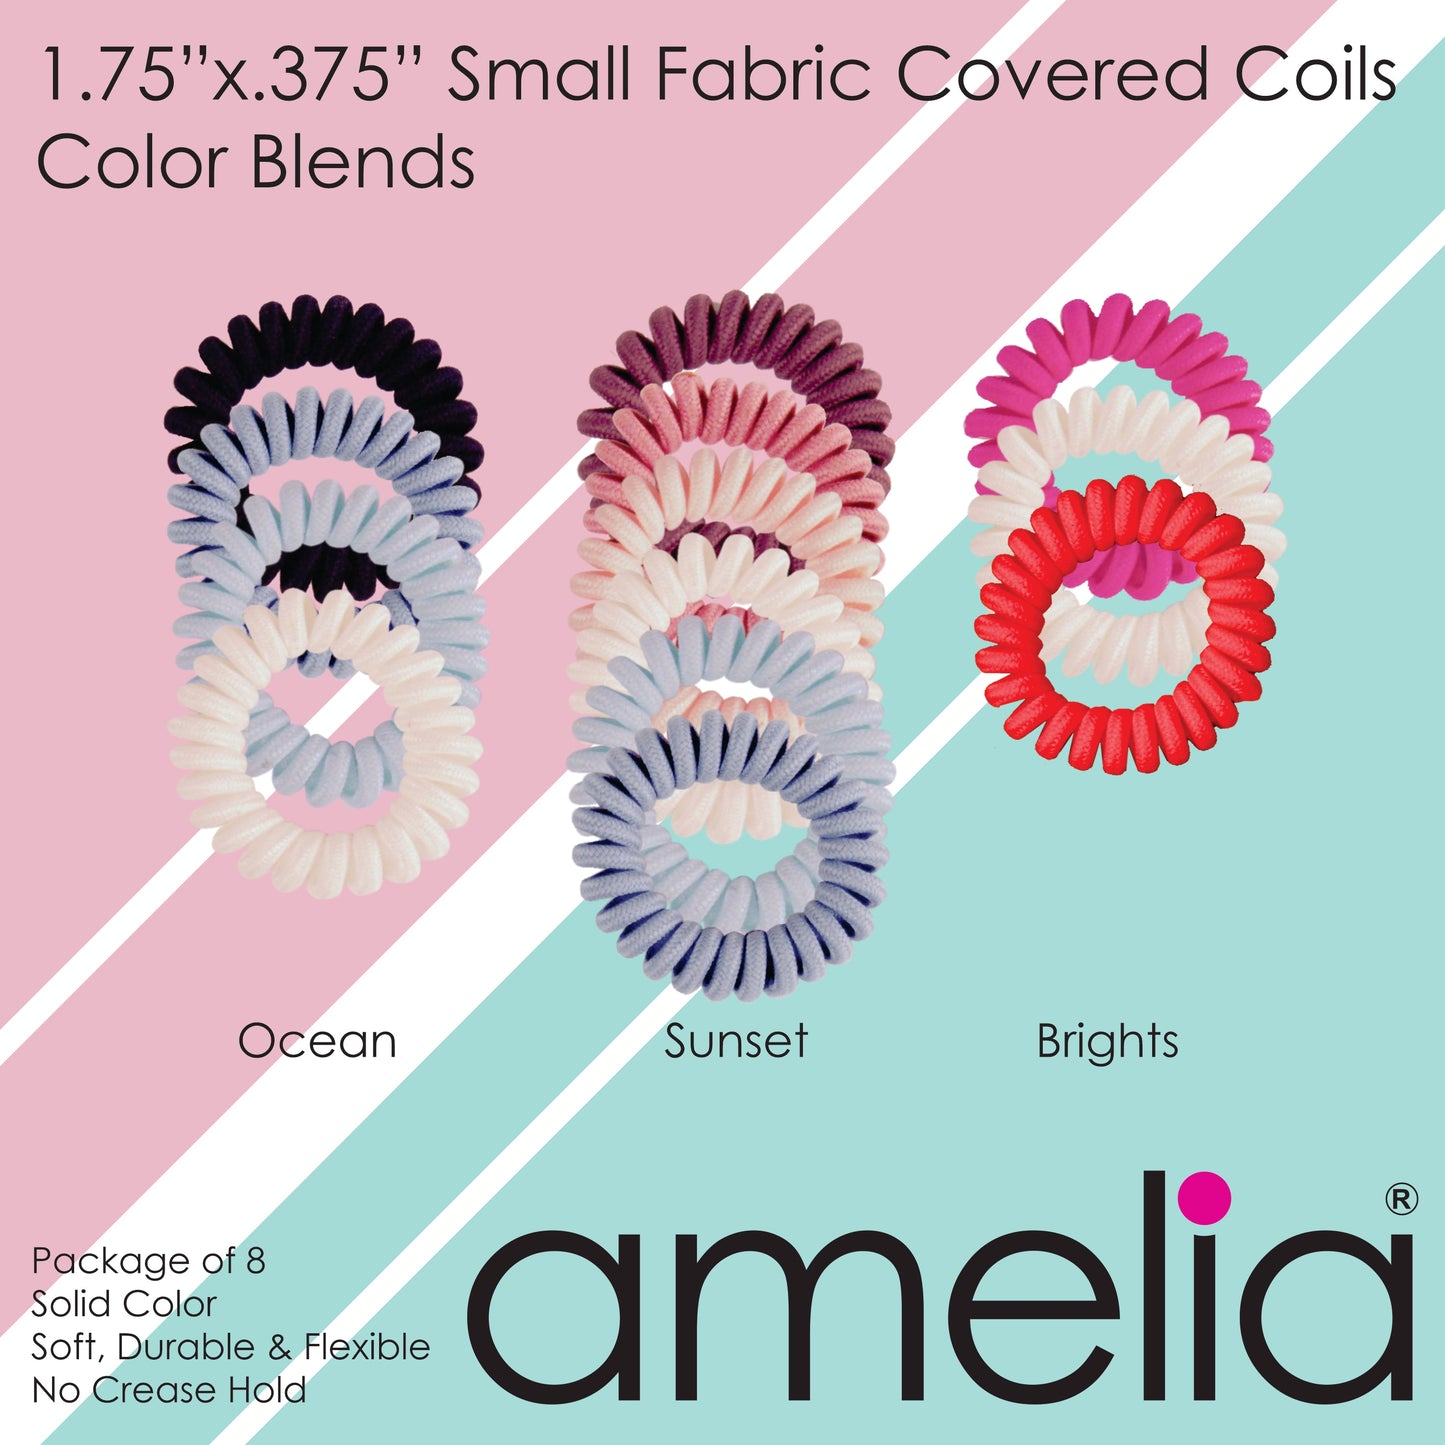 Amelia Beauty, 8 Small Fabric Wrapped Elastic Hair Coils, 1.75in Diameter Spiral Hair Ties, Gentle on Hair, Strong Hold and Minimizes Dents and Creases, Navy Blue